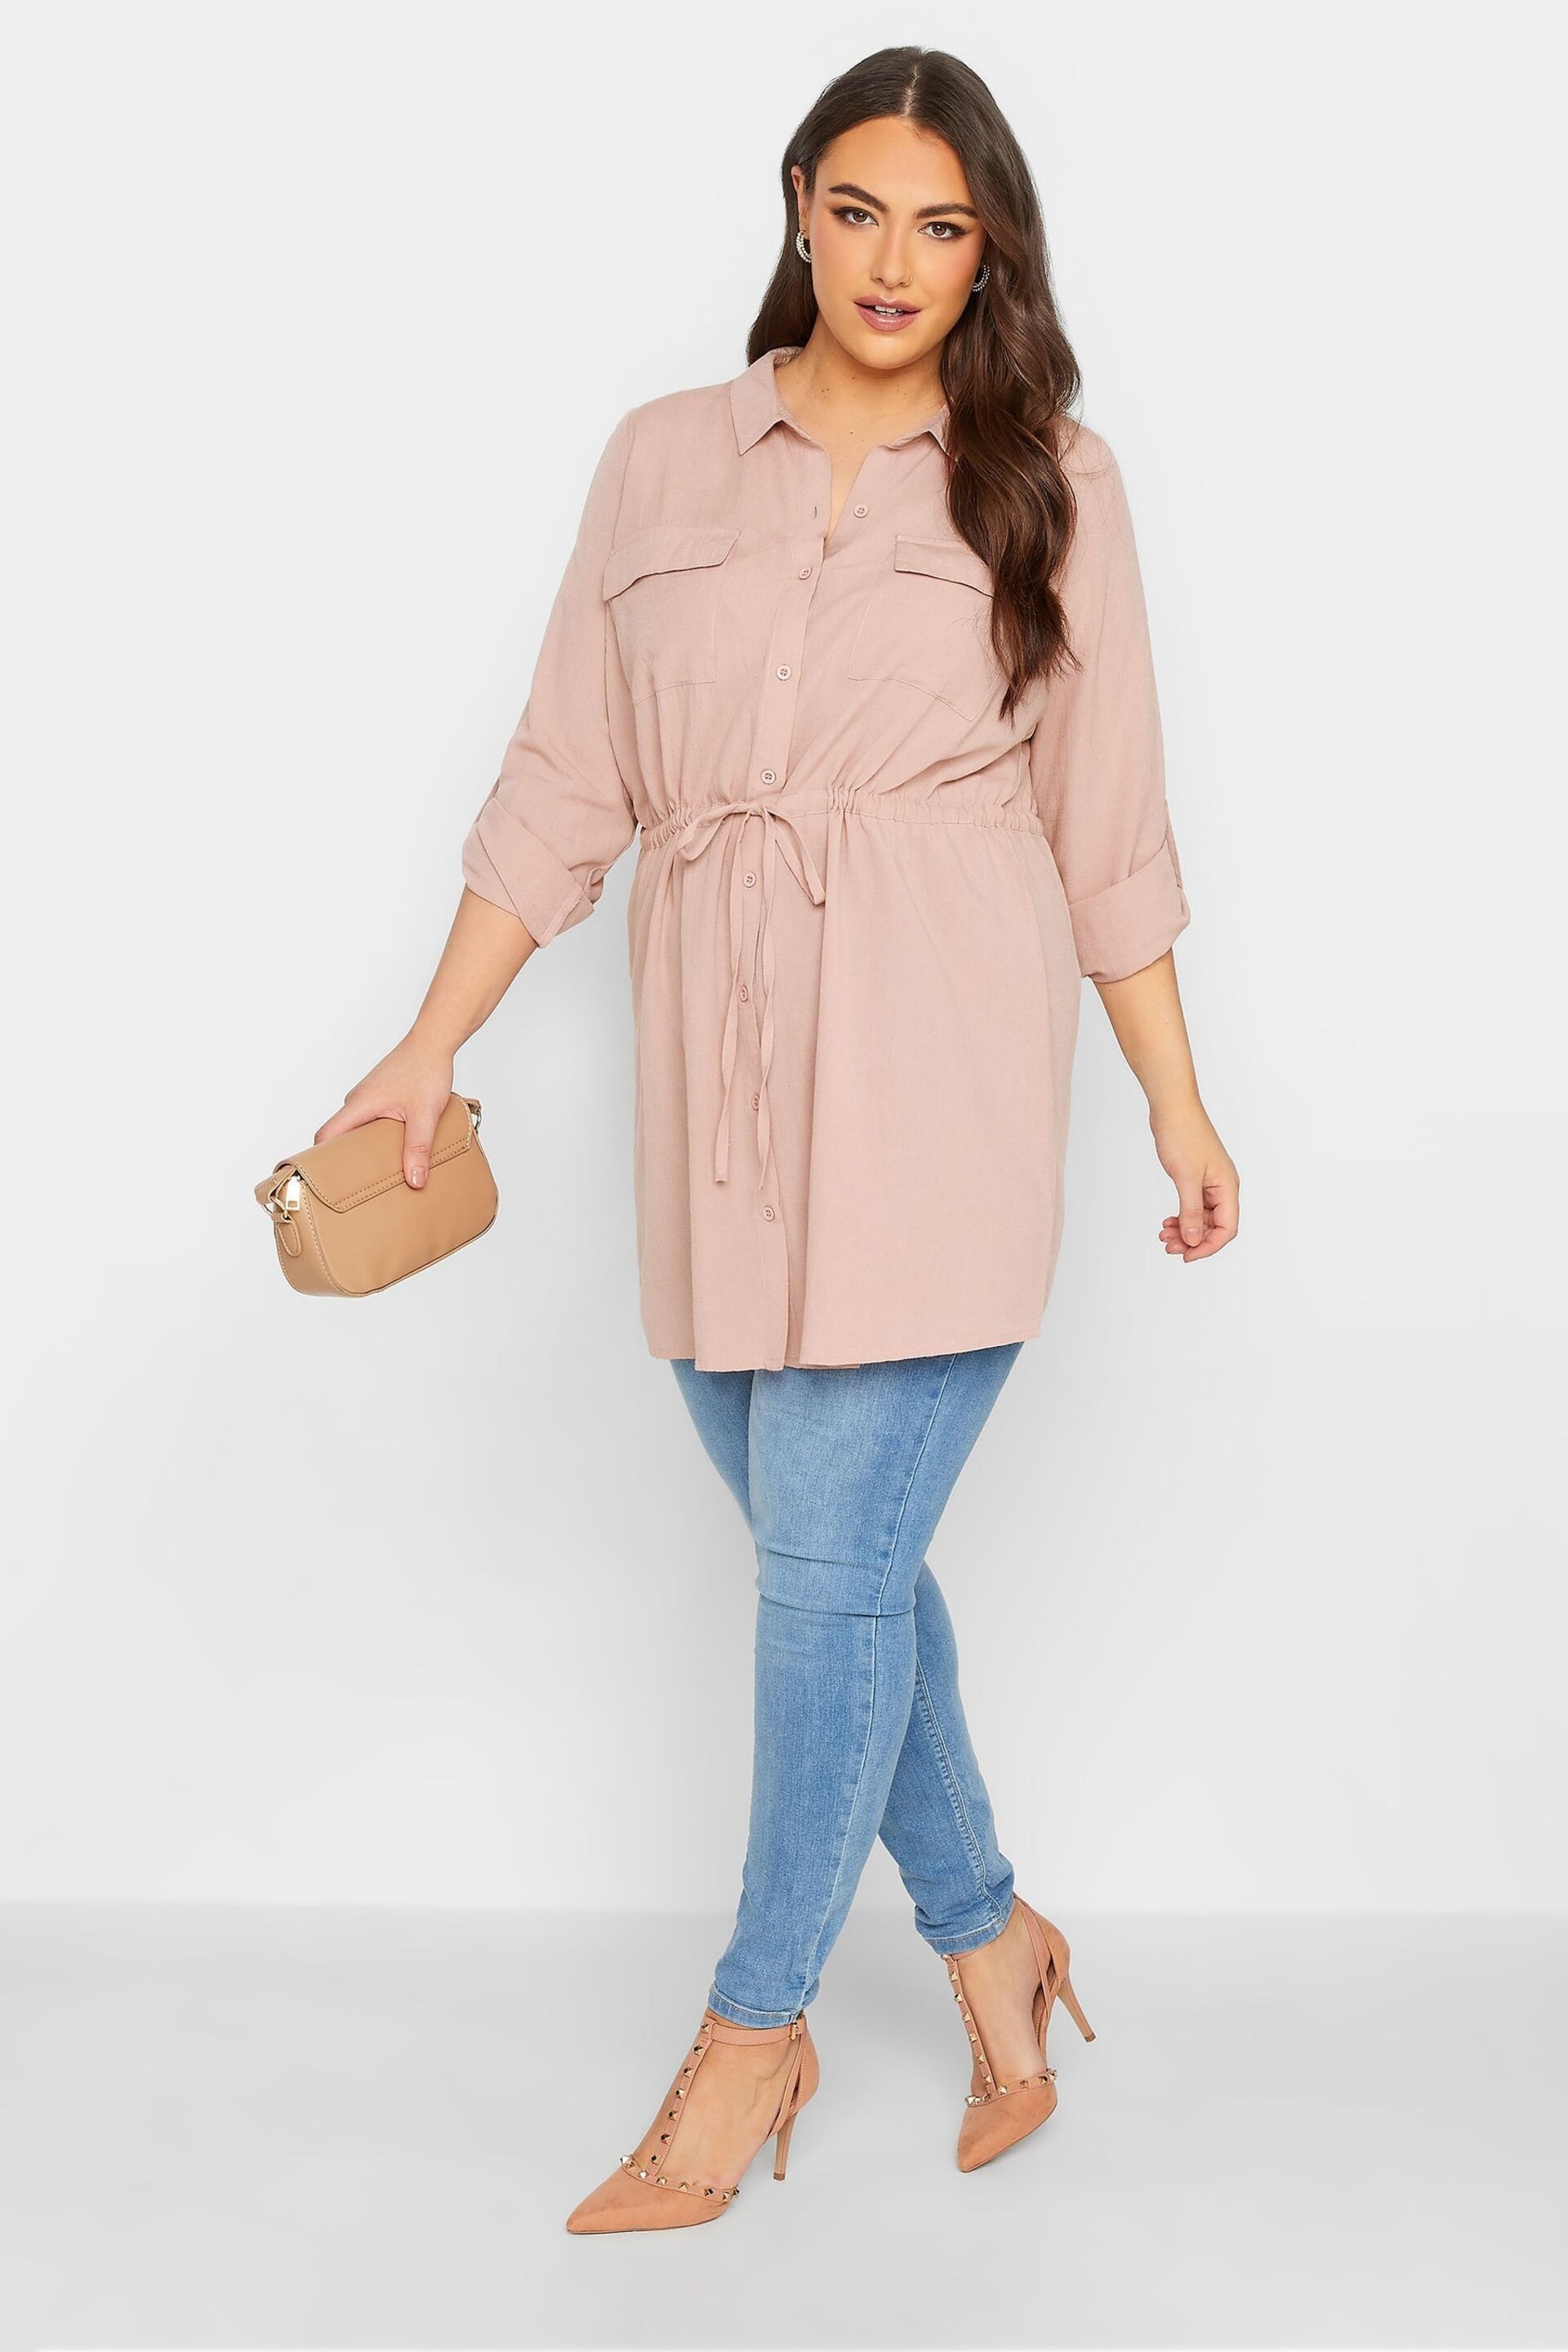 Yours Curve Pink Linen Utility Tunic Contains Linen - Image 2 of 4